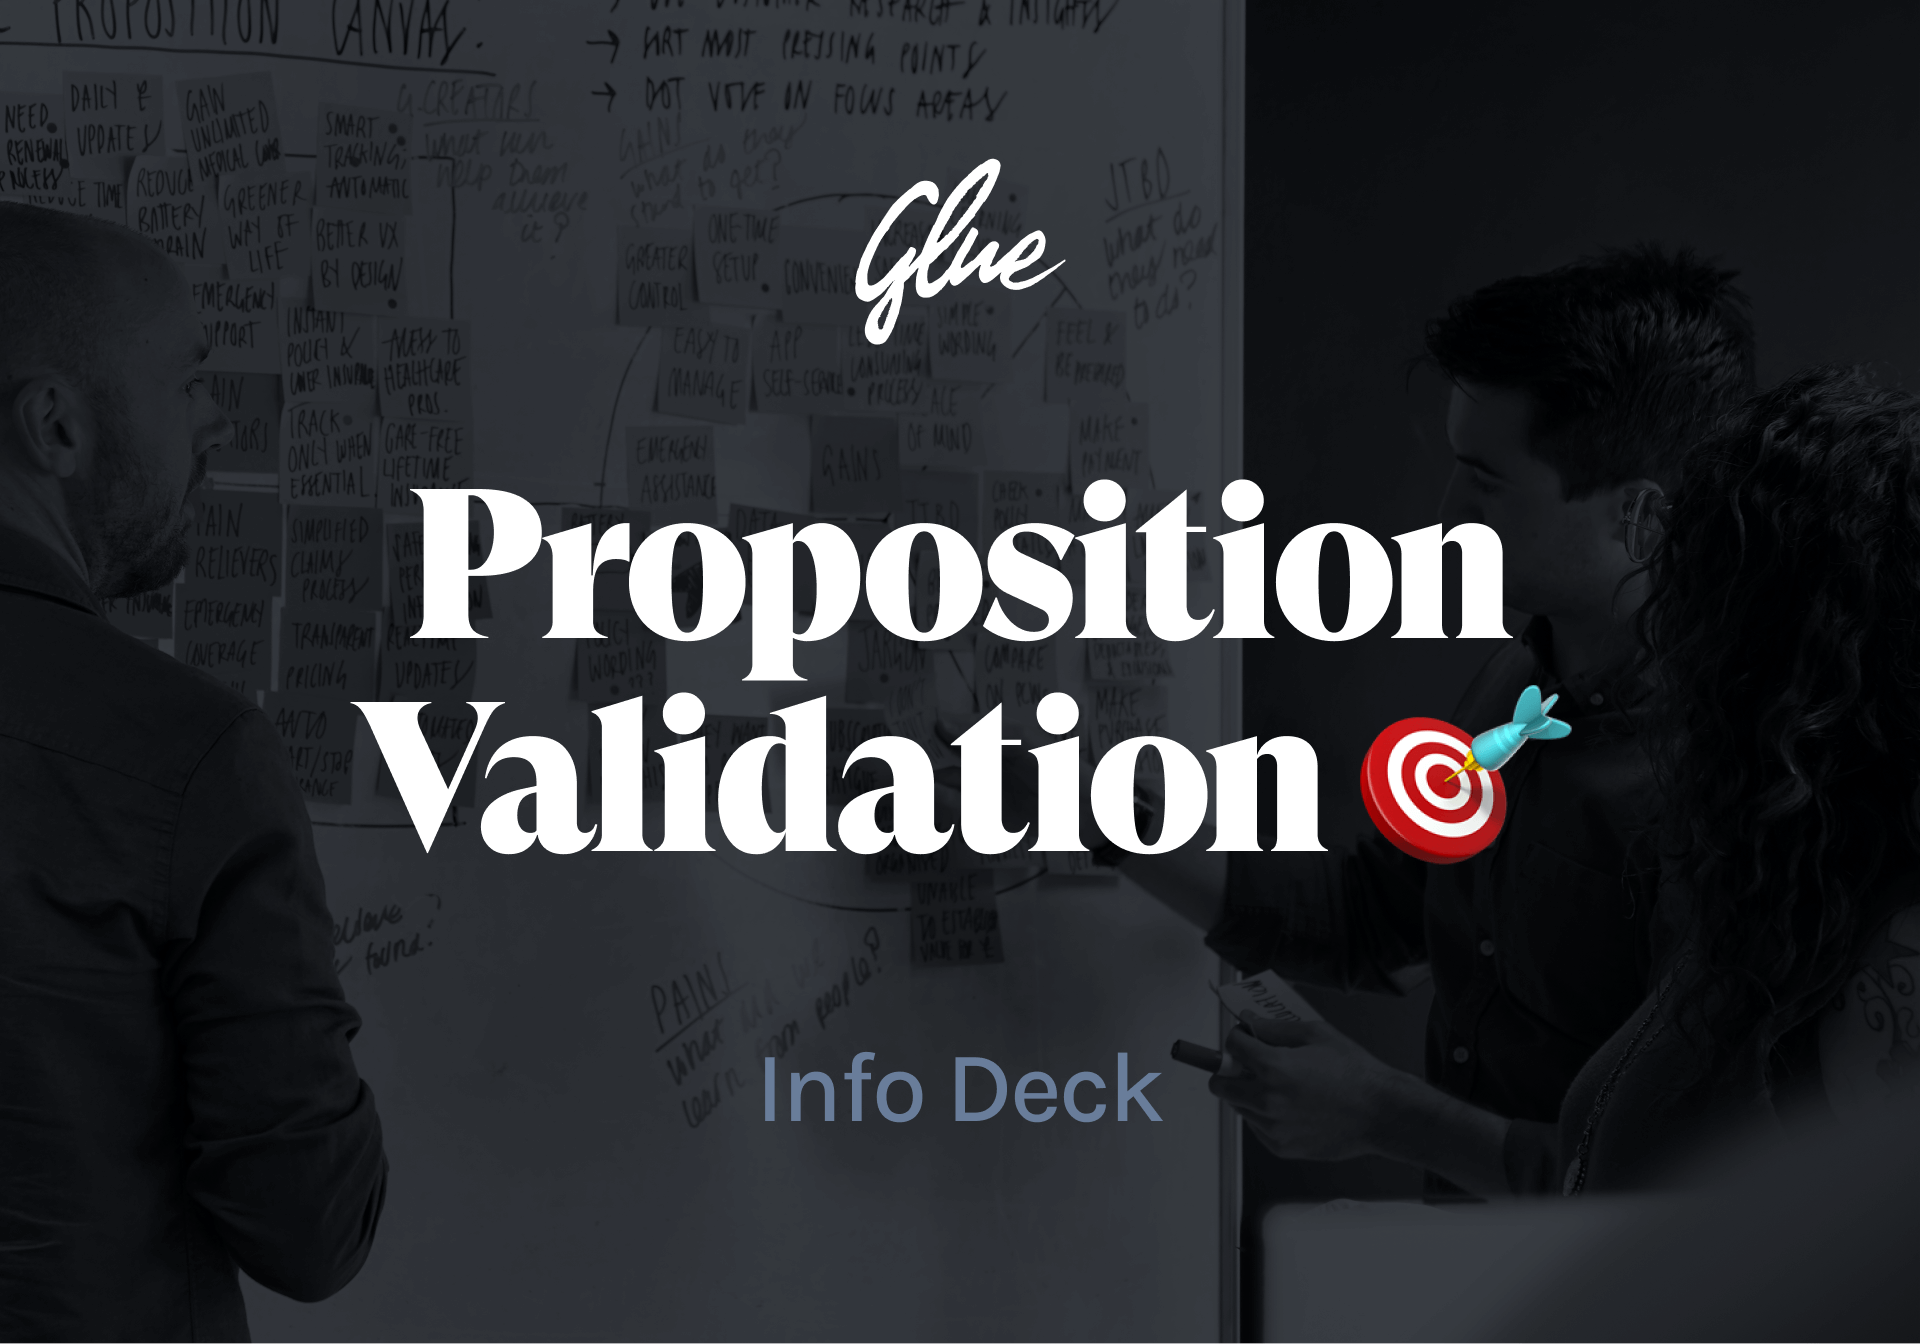 Glue Proposition validation info-deck cover